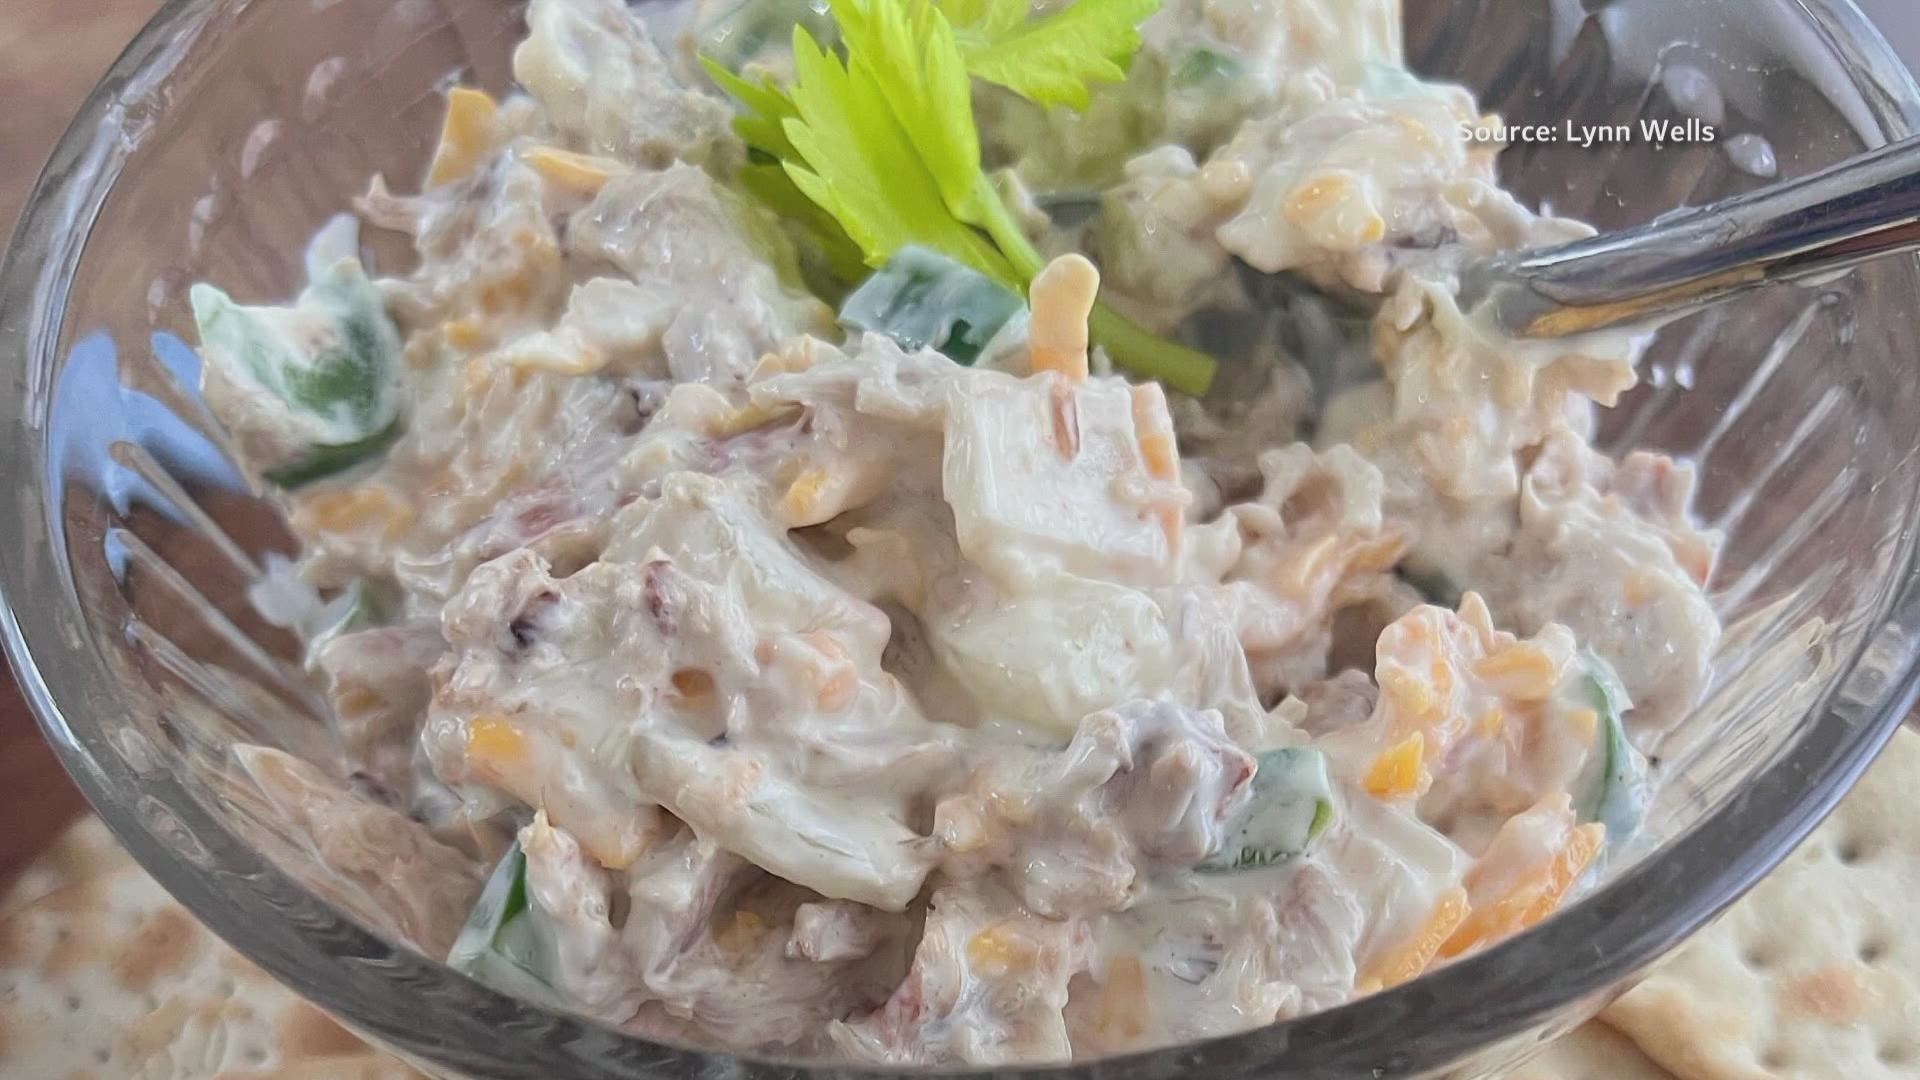 Our State recipe developer Lynn Wells demonstrates how to make Richard Petty's Favorite Crab Salad.